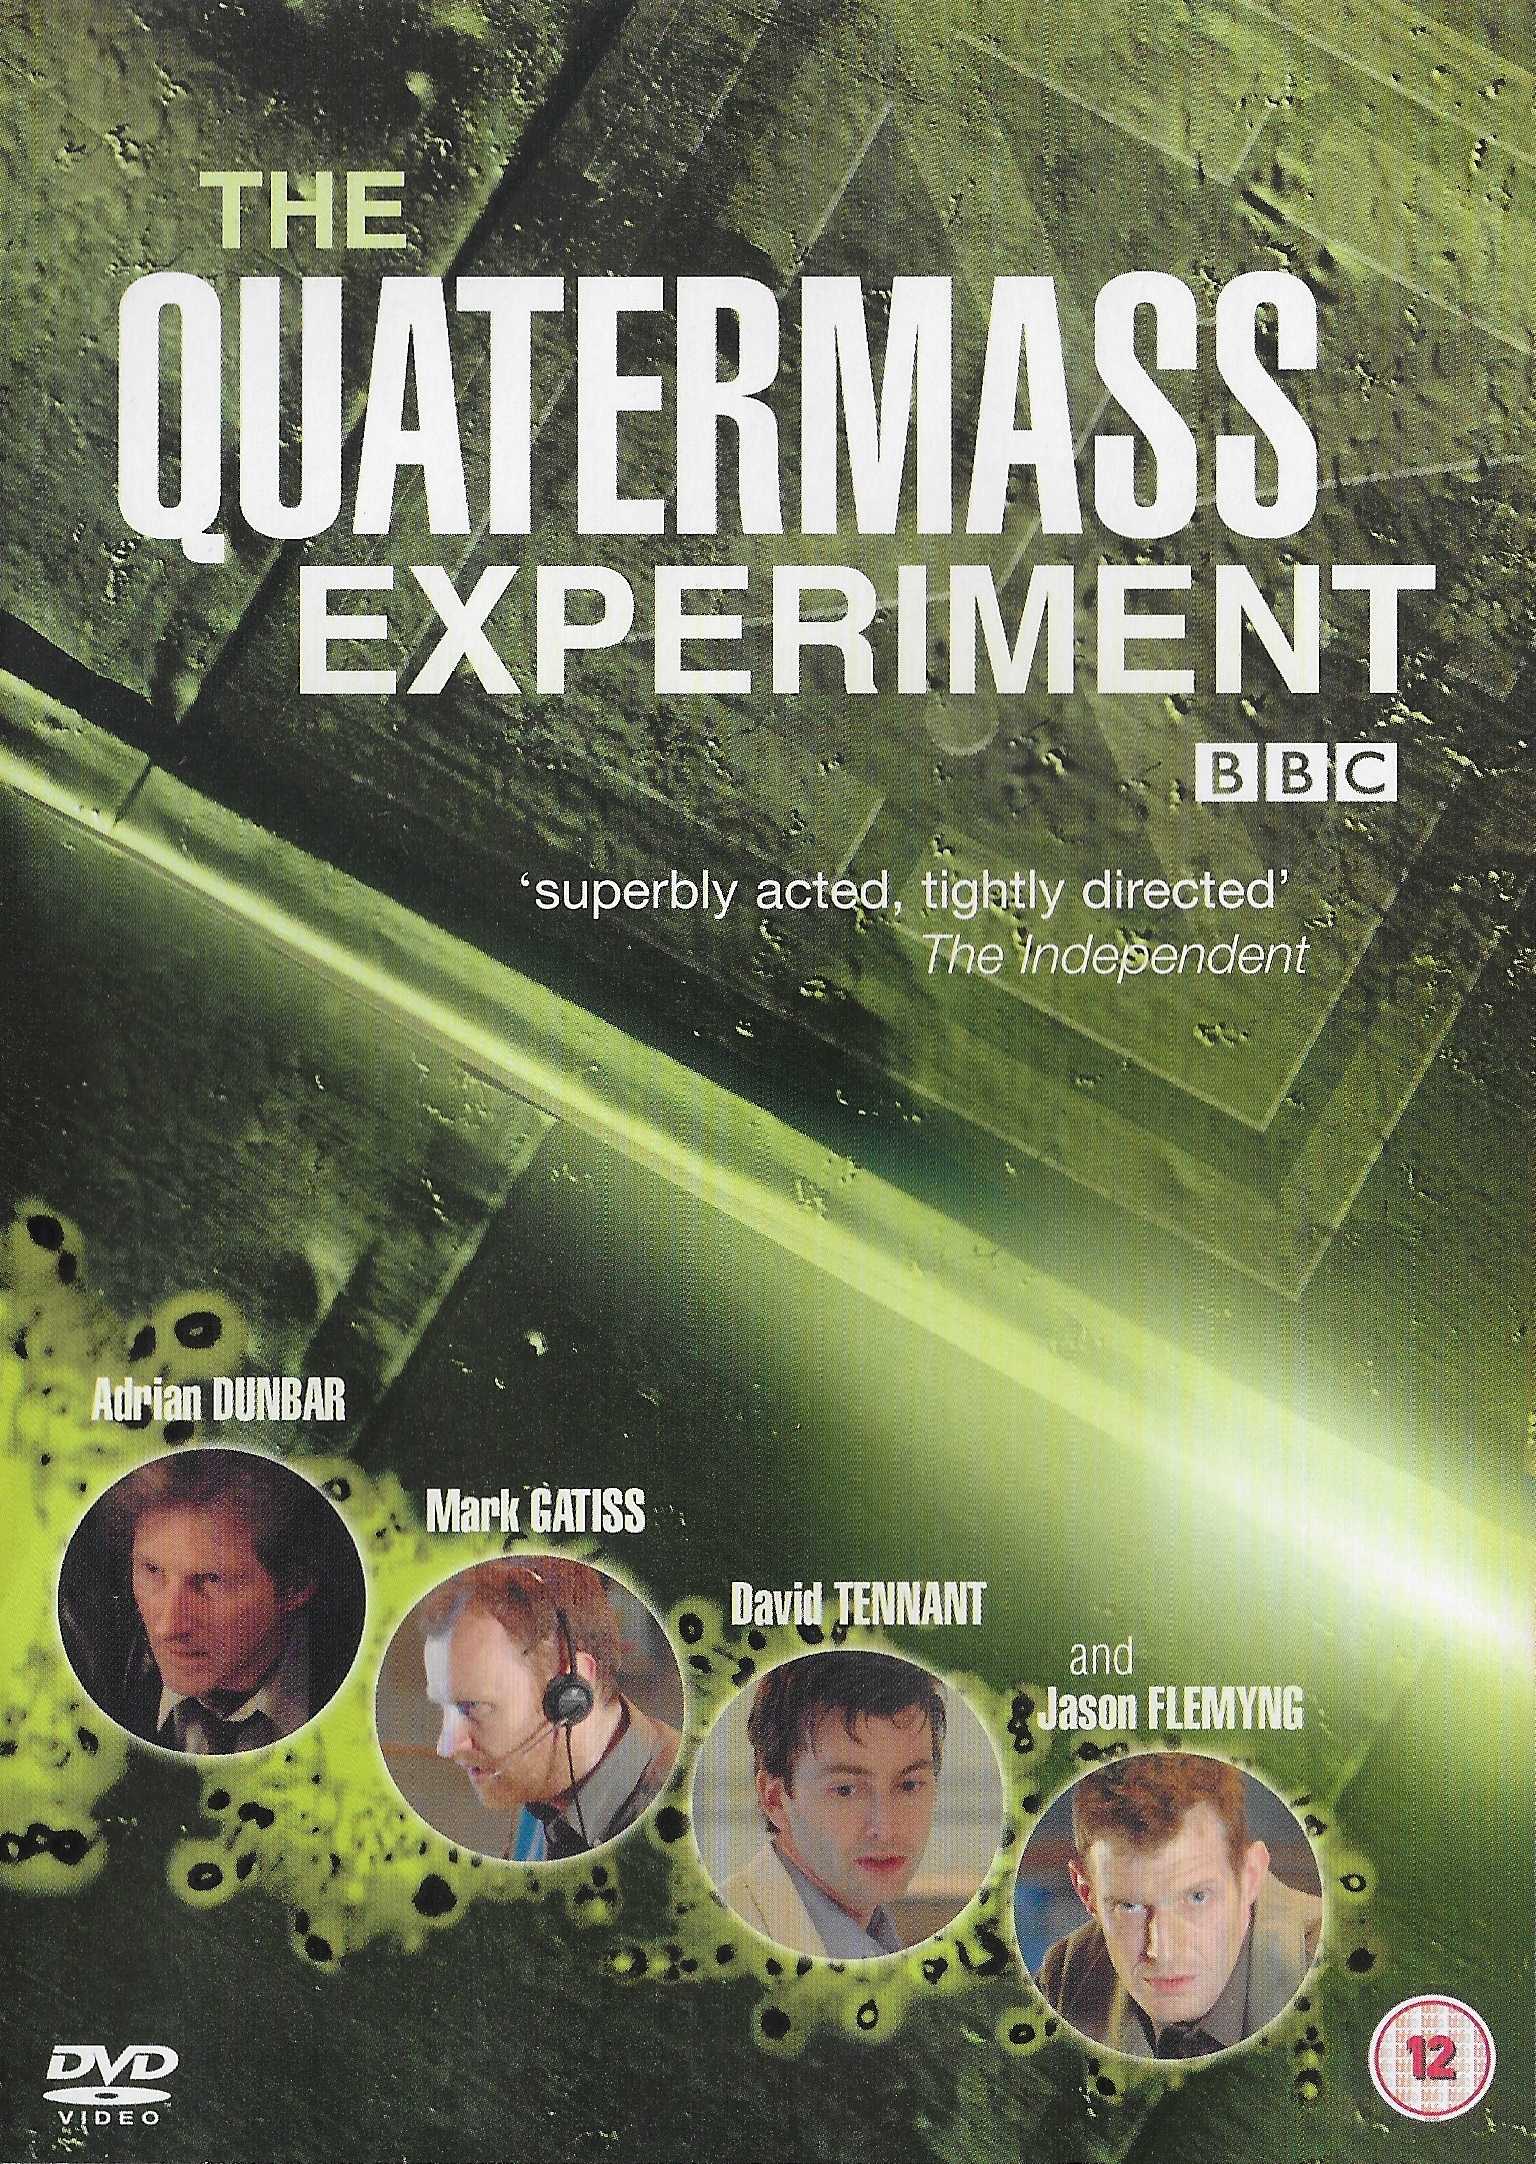 Picture of The Quatermass experiment by artist Nigel Kneale from the BBC dvds - Records and Tapes library